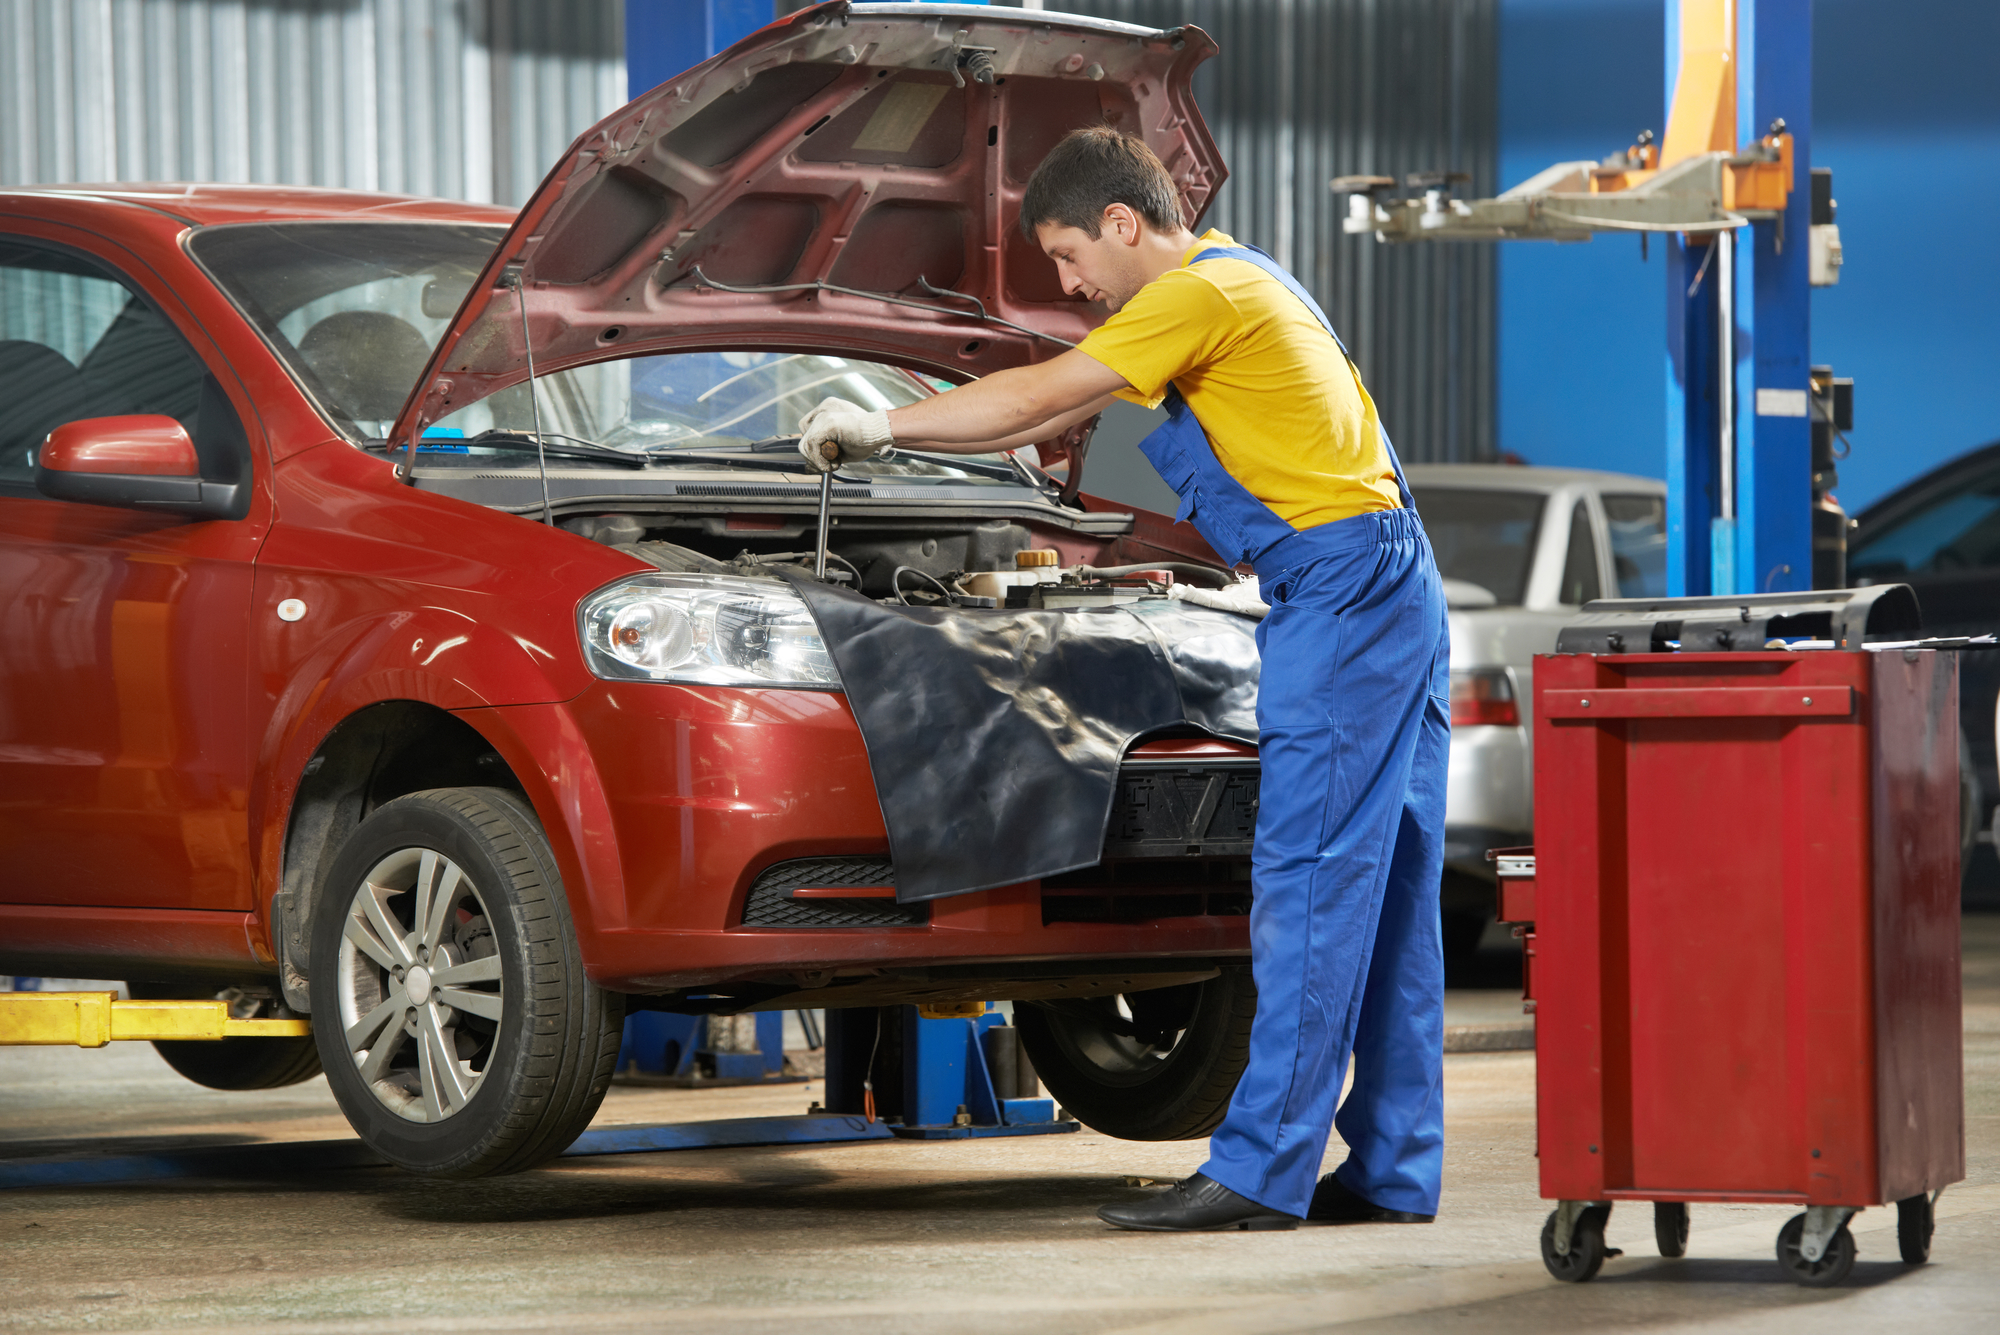 Auto Repair Shops Near Me – Find the Right One in Phoenix